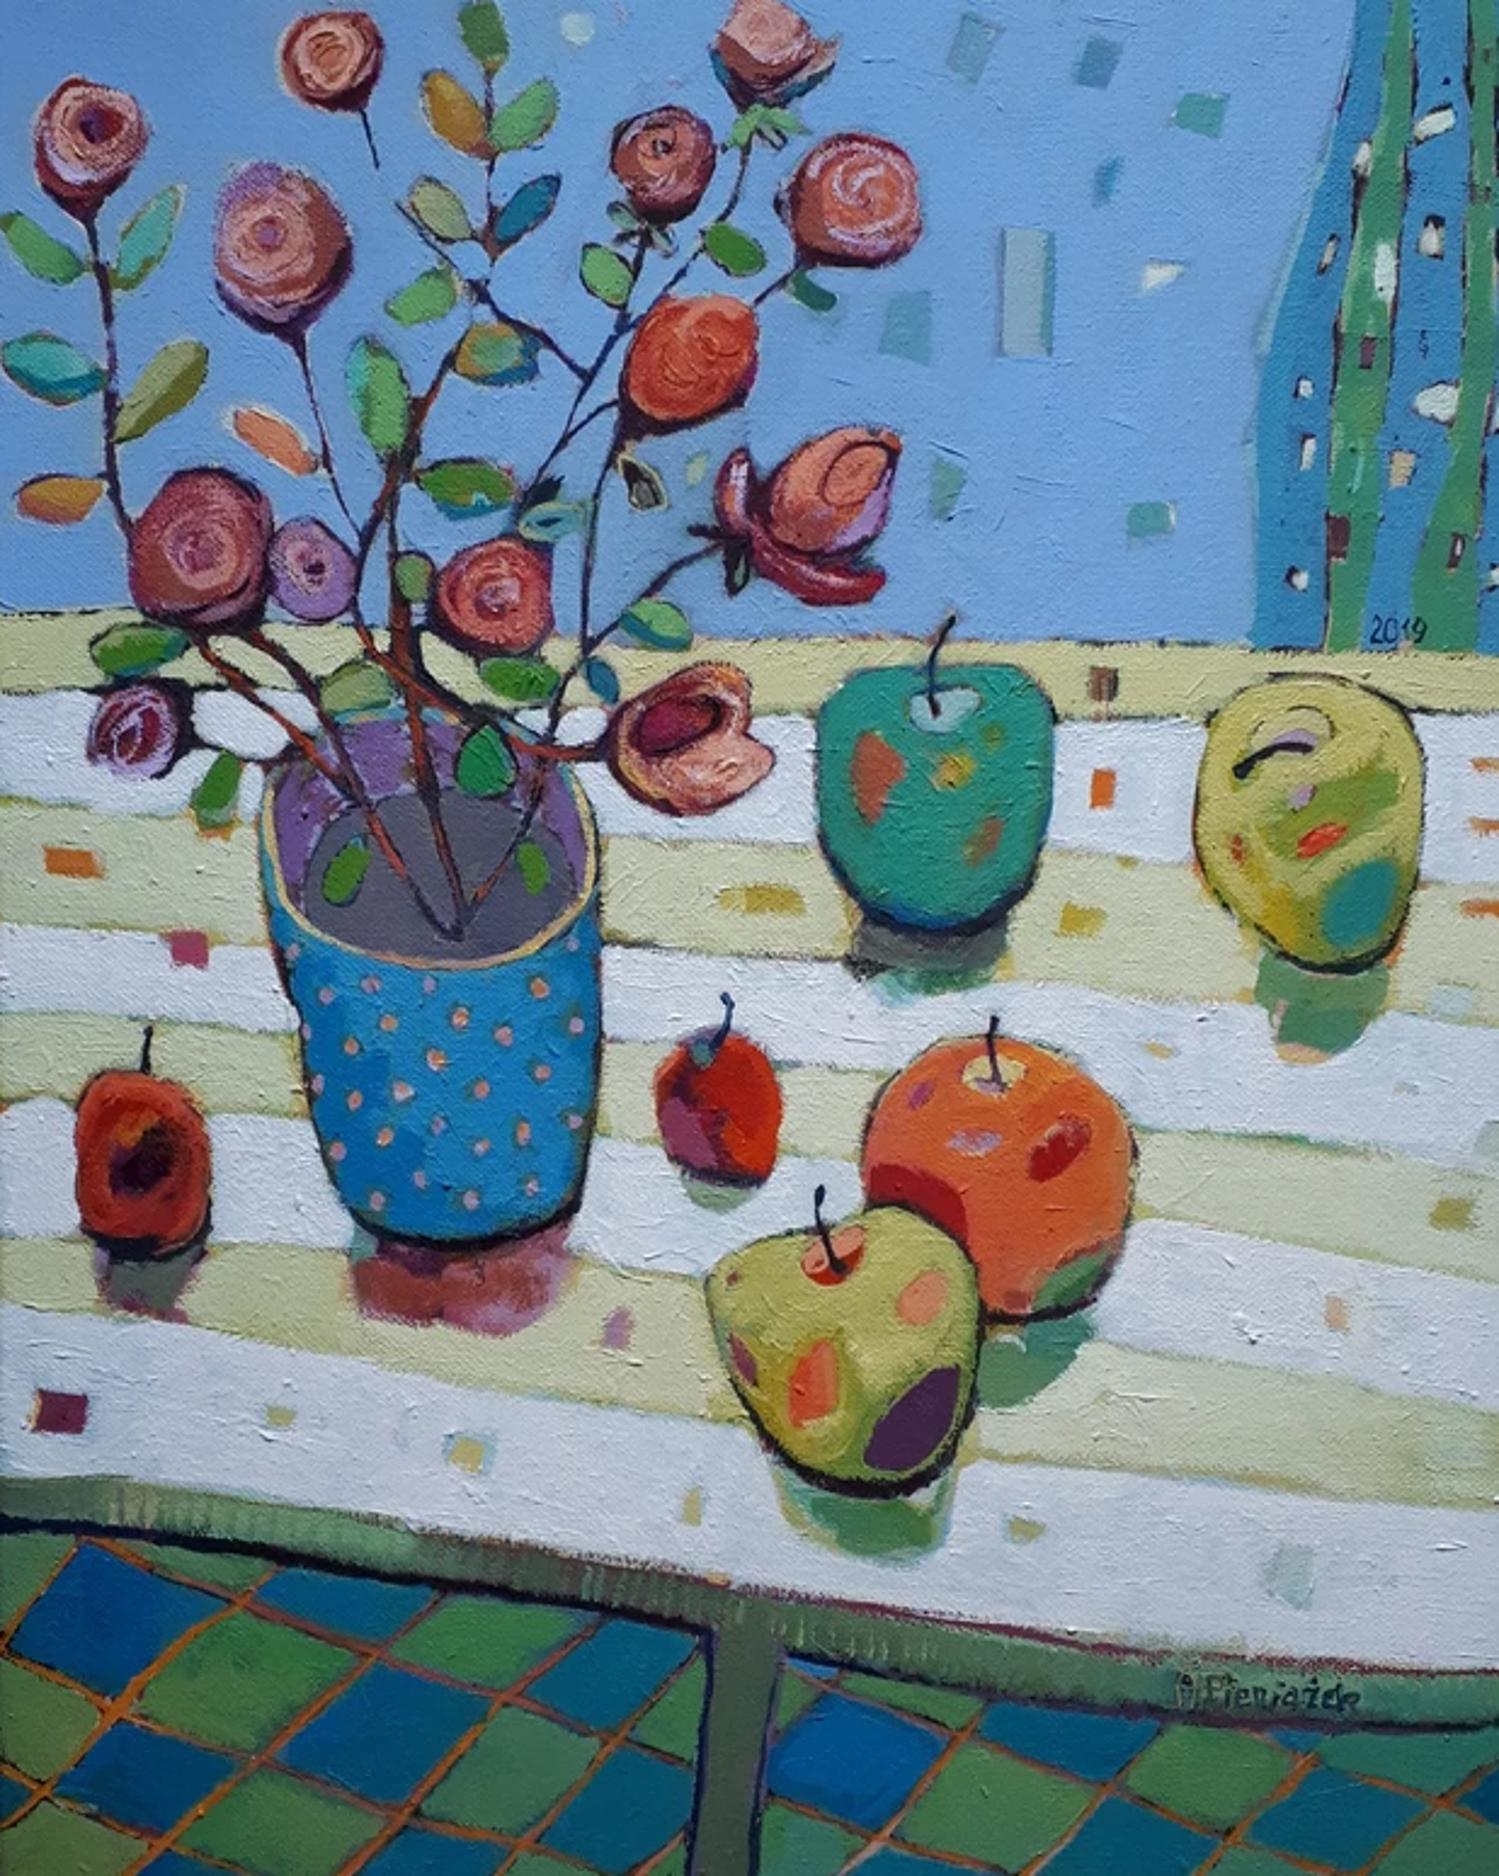 Ania Pieniazek Interior Painting - Flower Pot & Apples - Colourful, Patterned Still Life: Acrylic on Canvas 